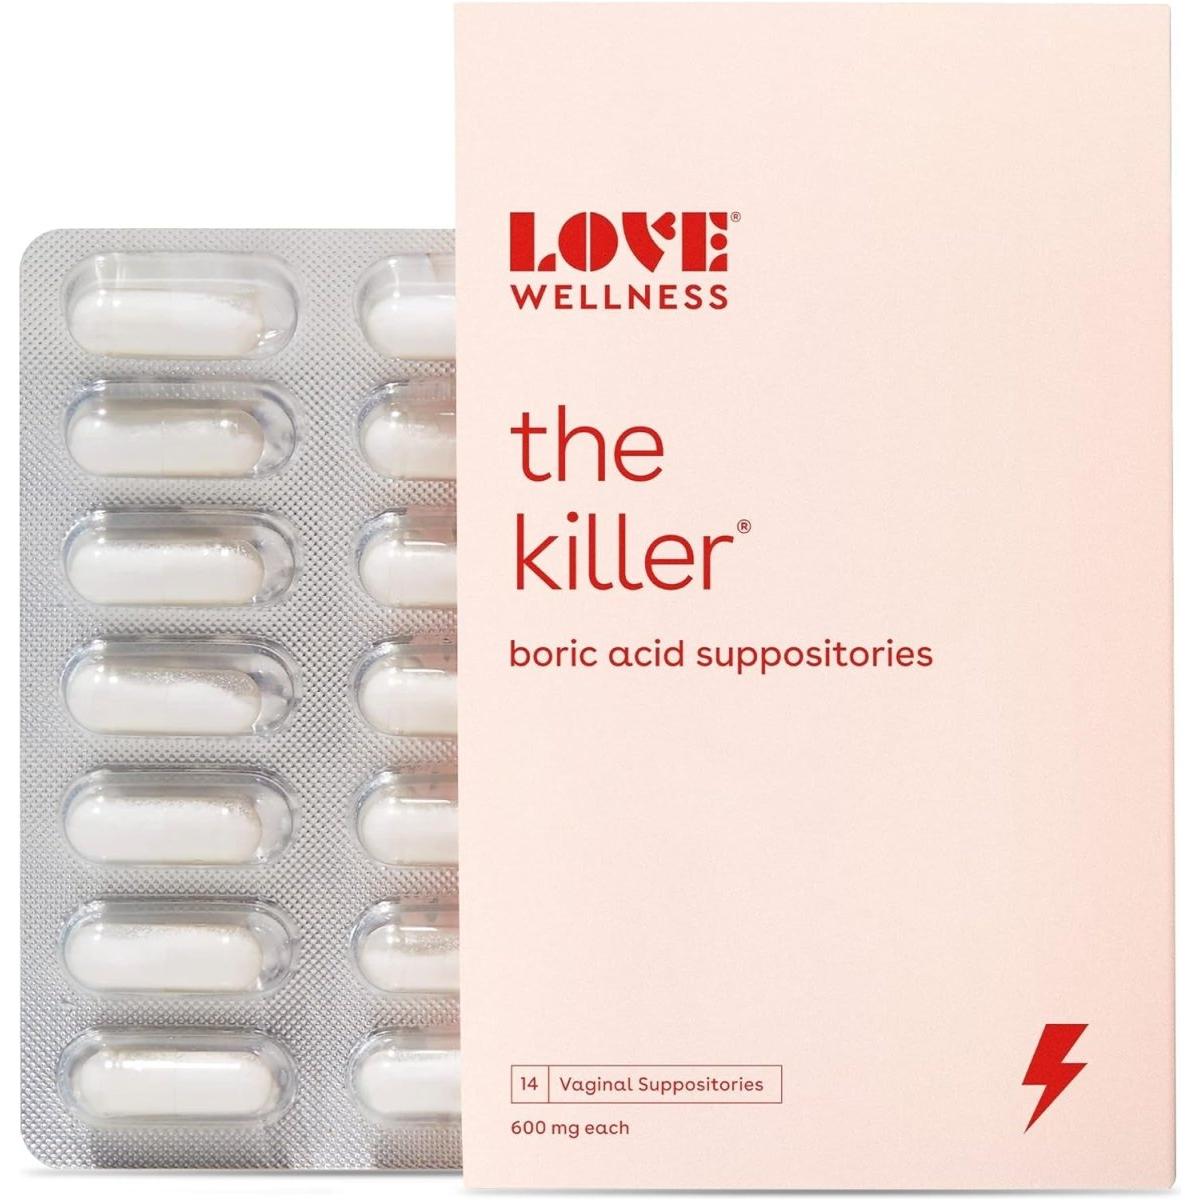 Love Wellness Boric Acid Suppositories for Women, the Killer | Vaginal Suppository for Healthy Ph Balance & Odor Control - 54 Count - Glam Global UK